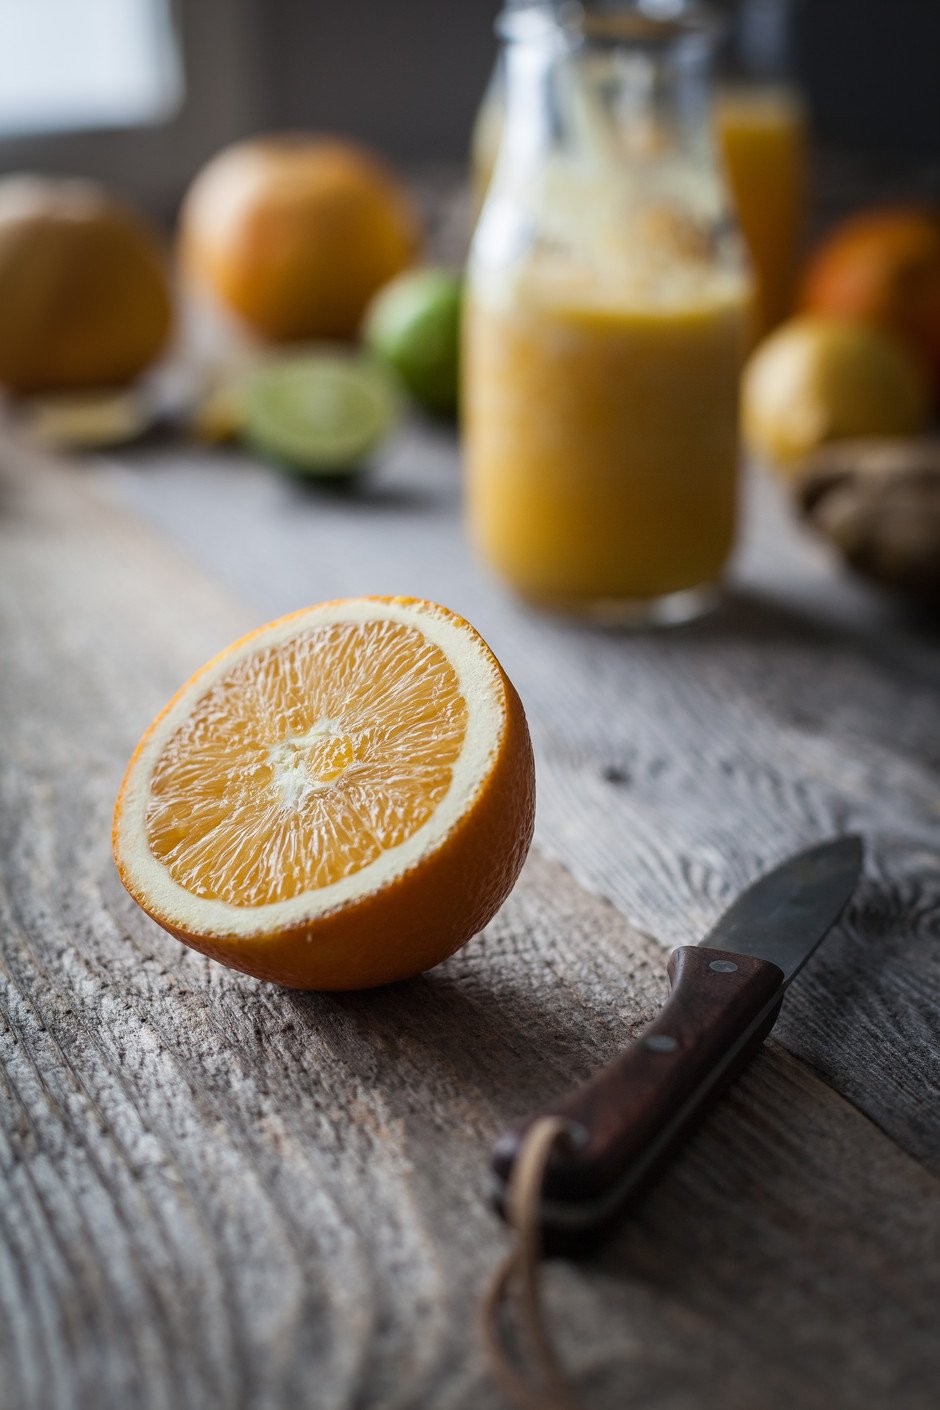 a close up portrait of an orange half sitting on a wooden table.